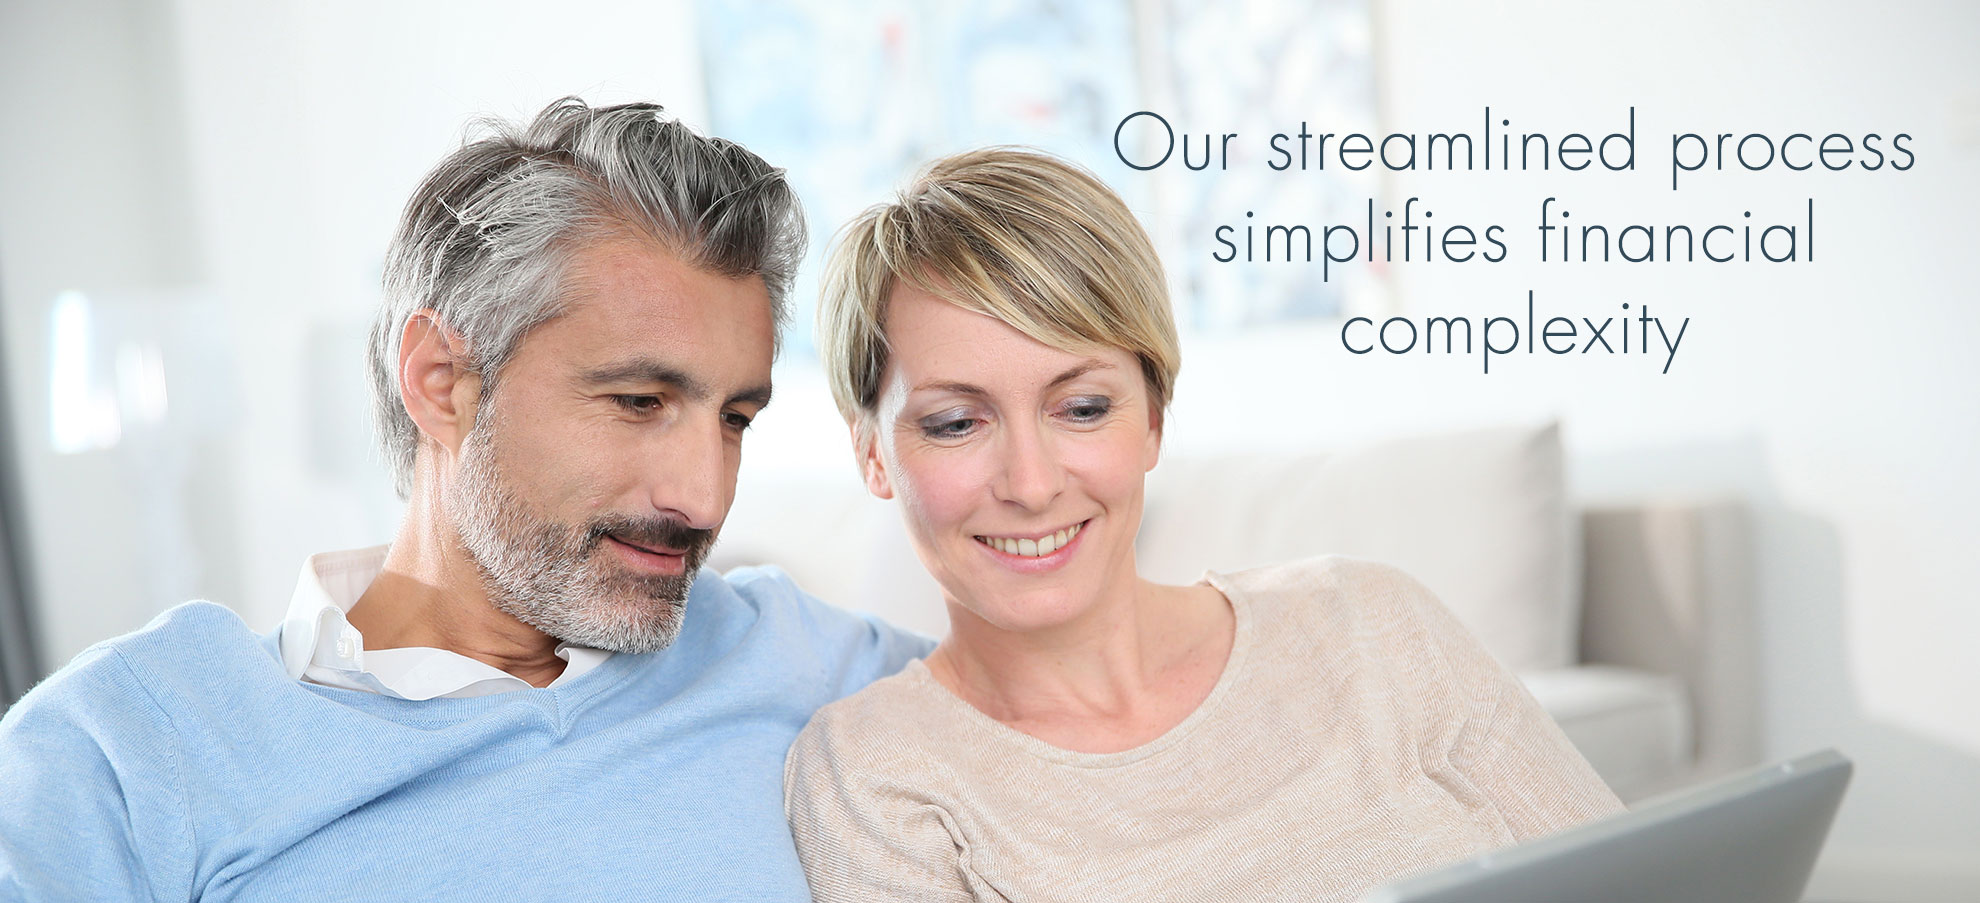 Our streamlined process simplifies financial complexity